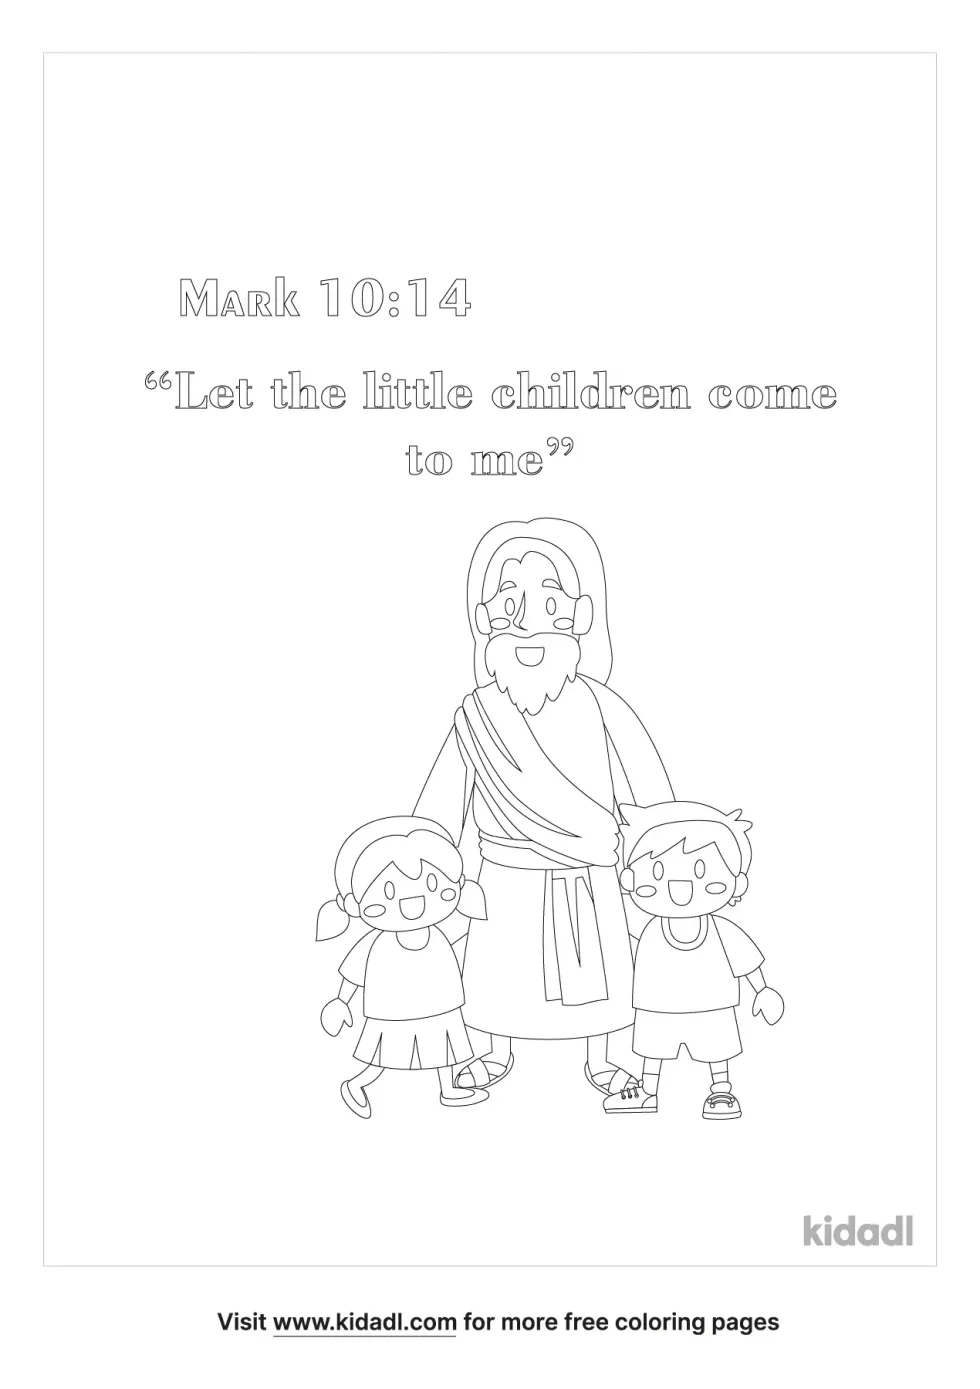 Mark 10:14 Coloring Page